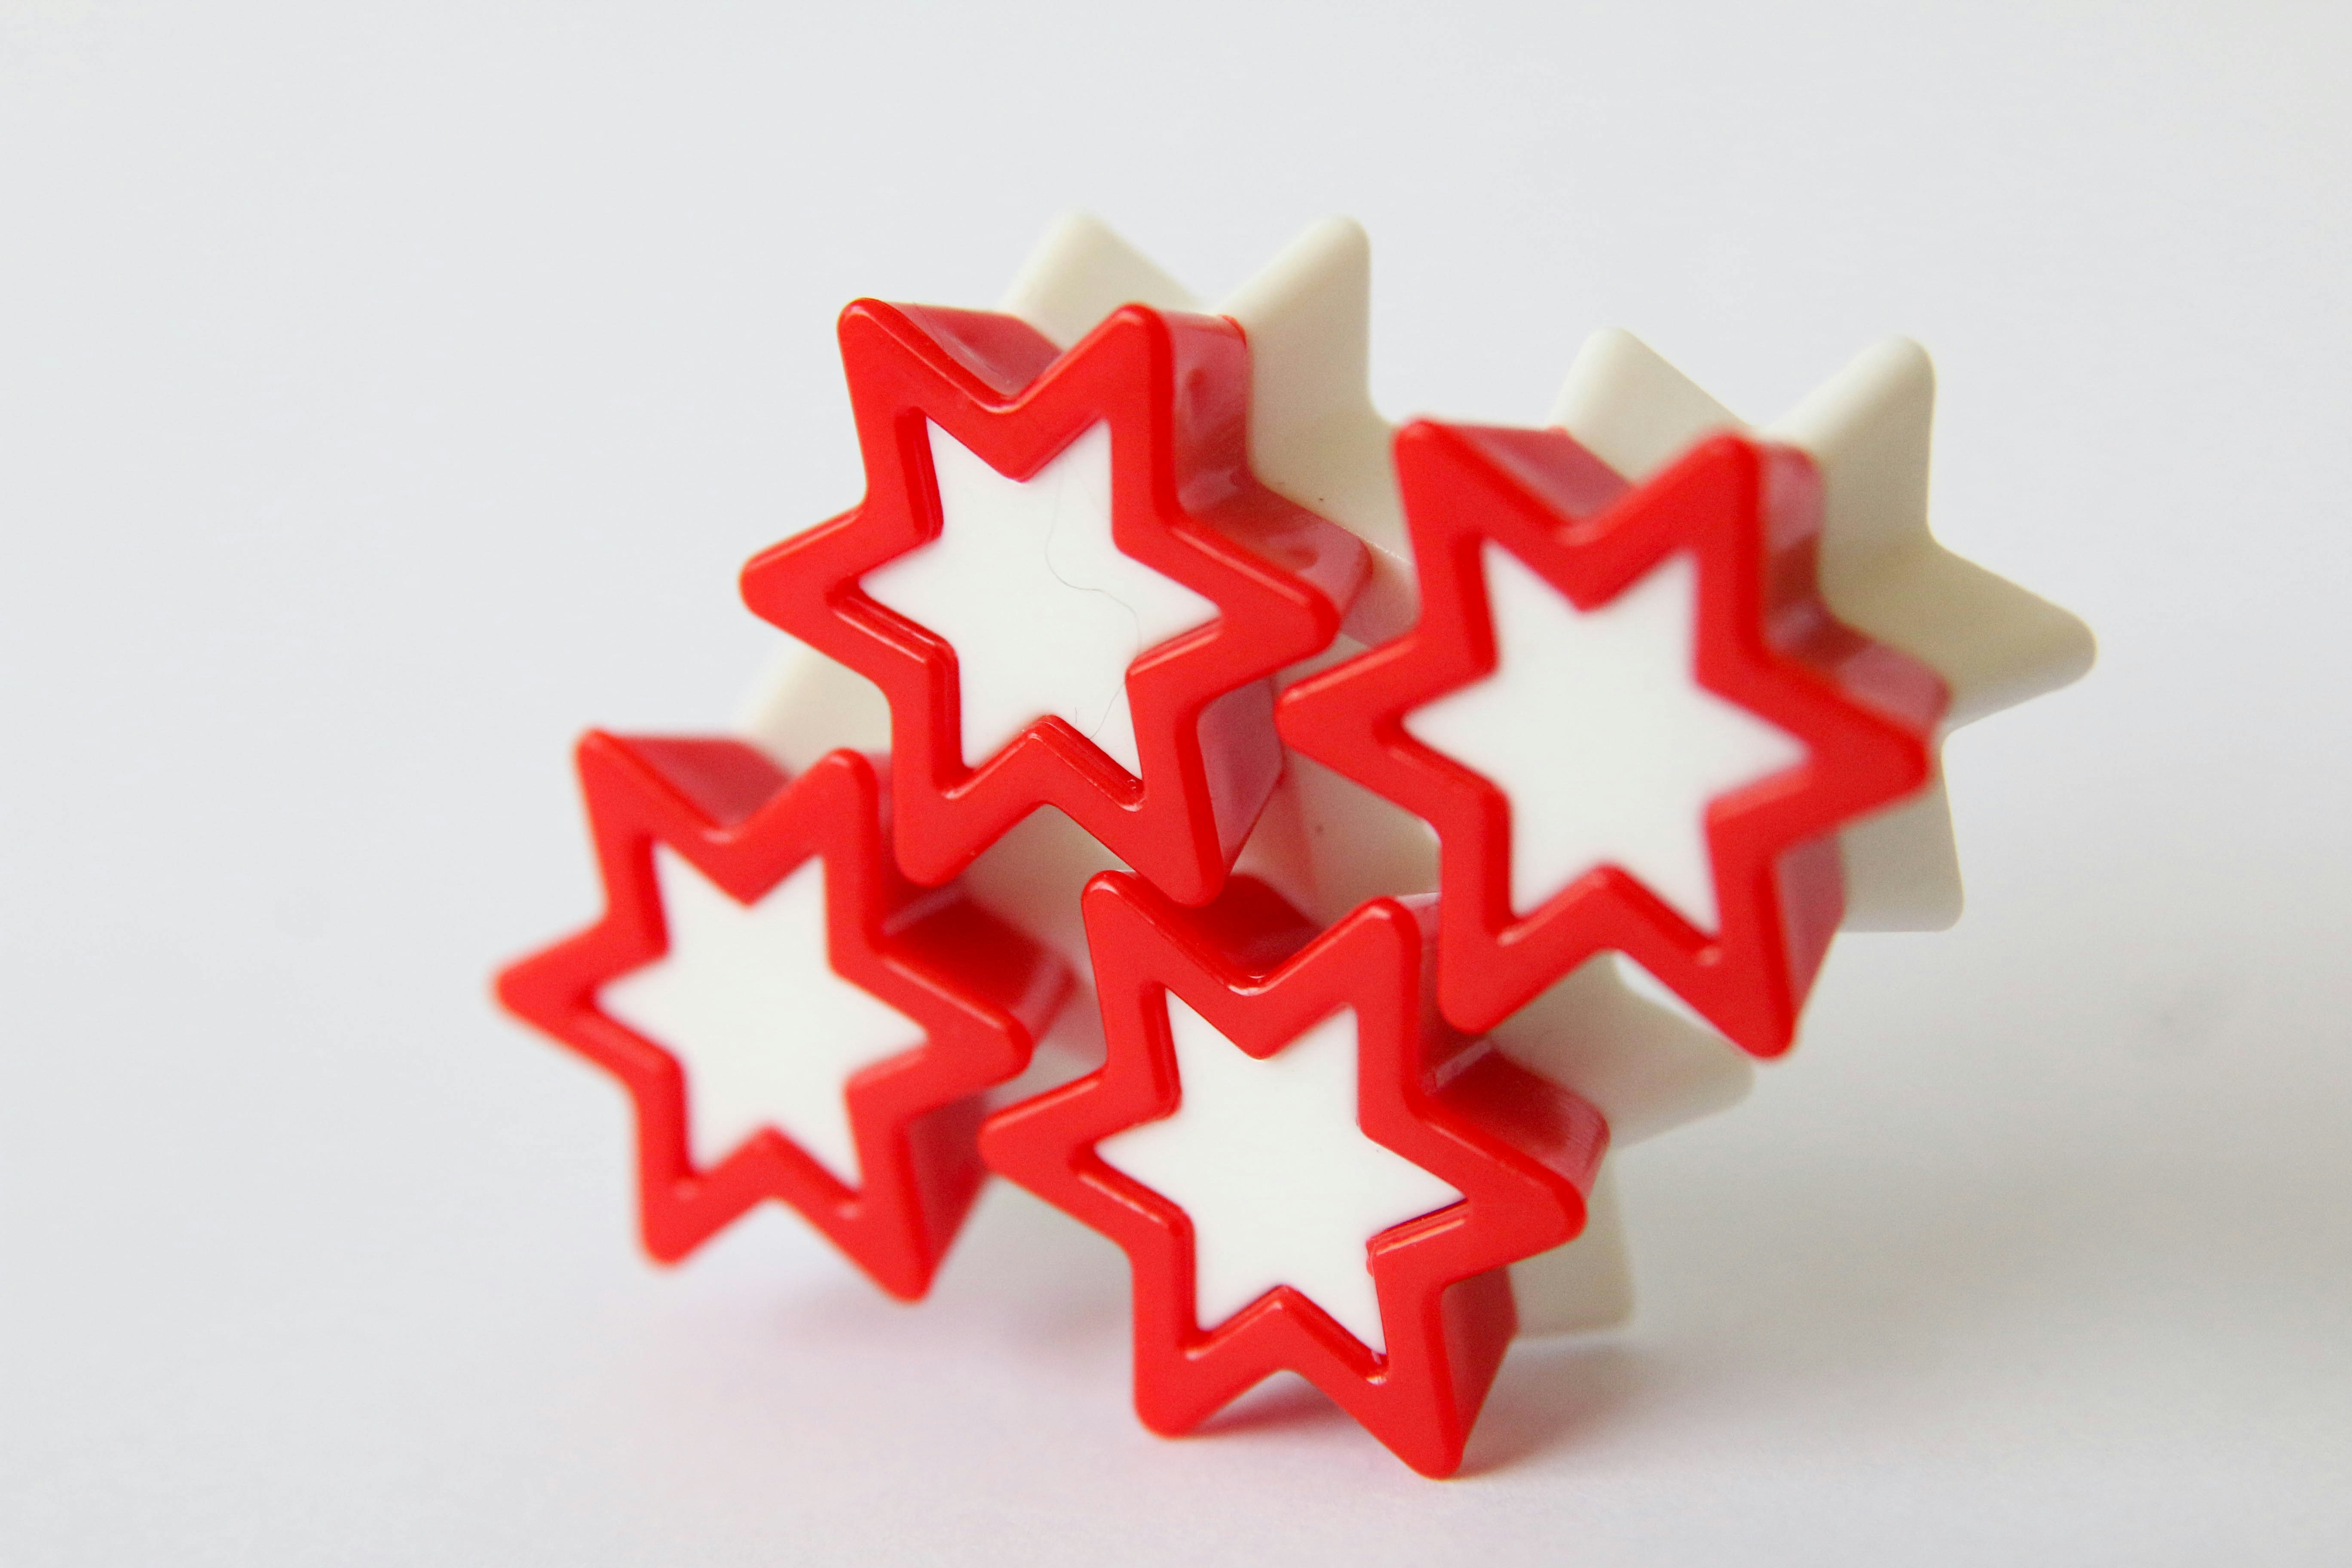 red star on white surface